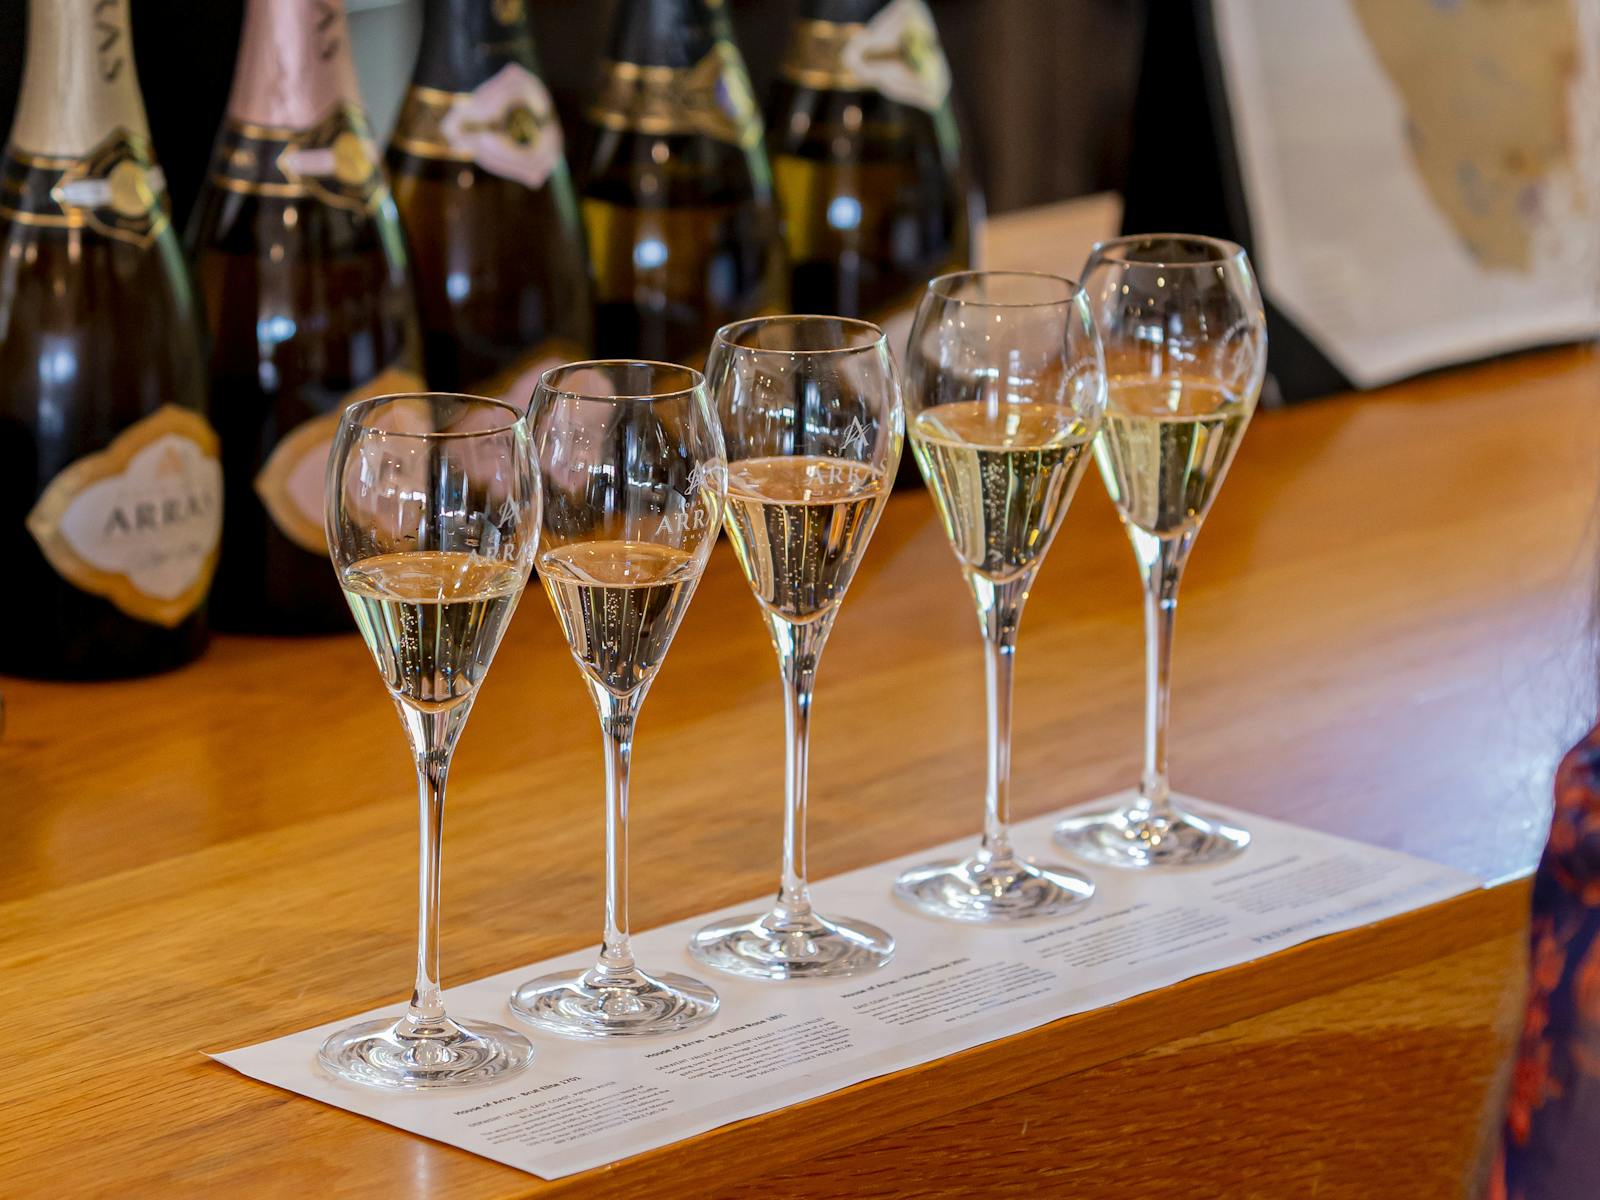 Our premium winemaking explored as part of our Sparkling Masterclass.